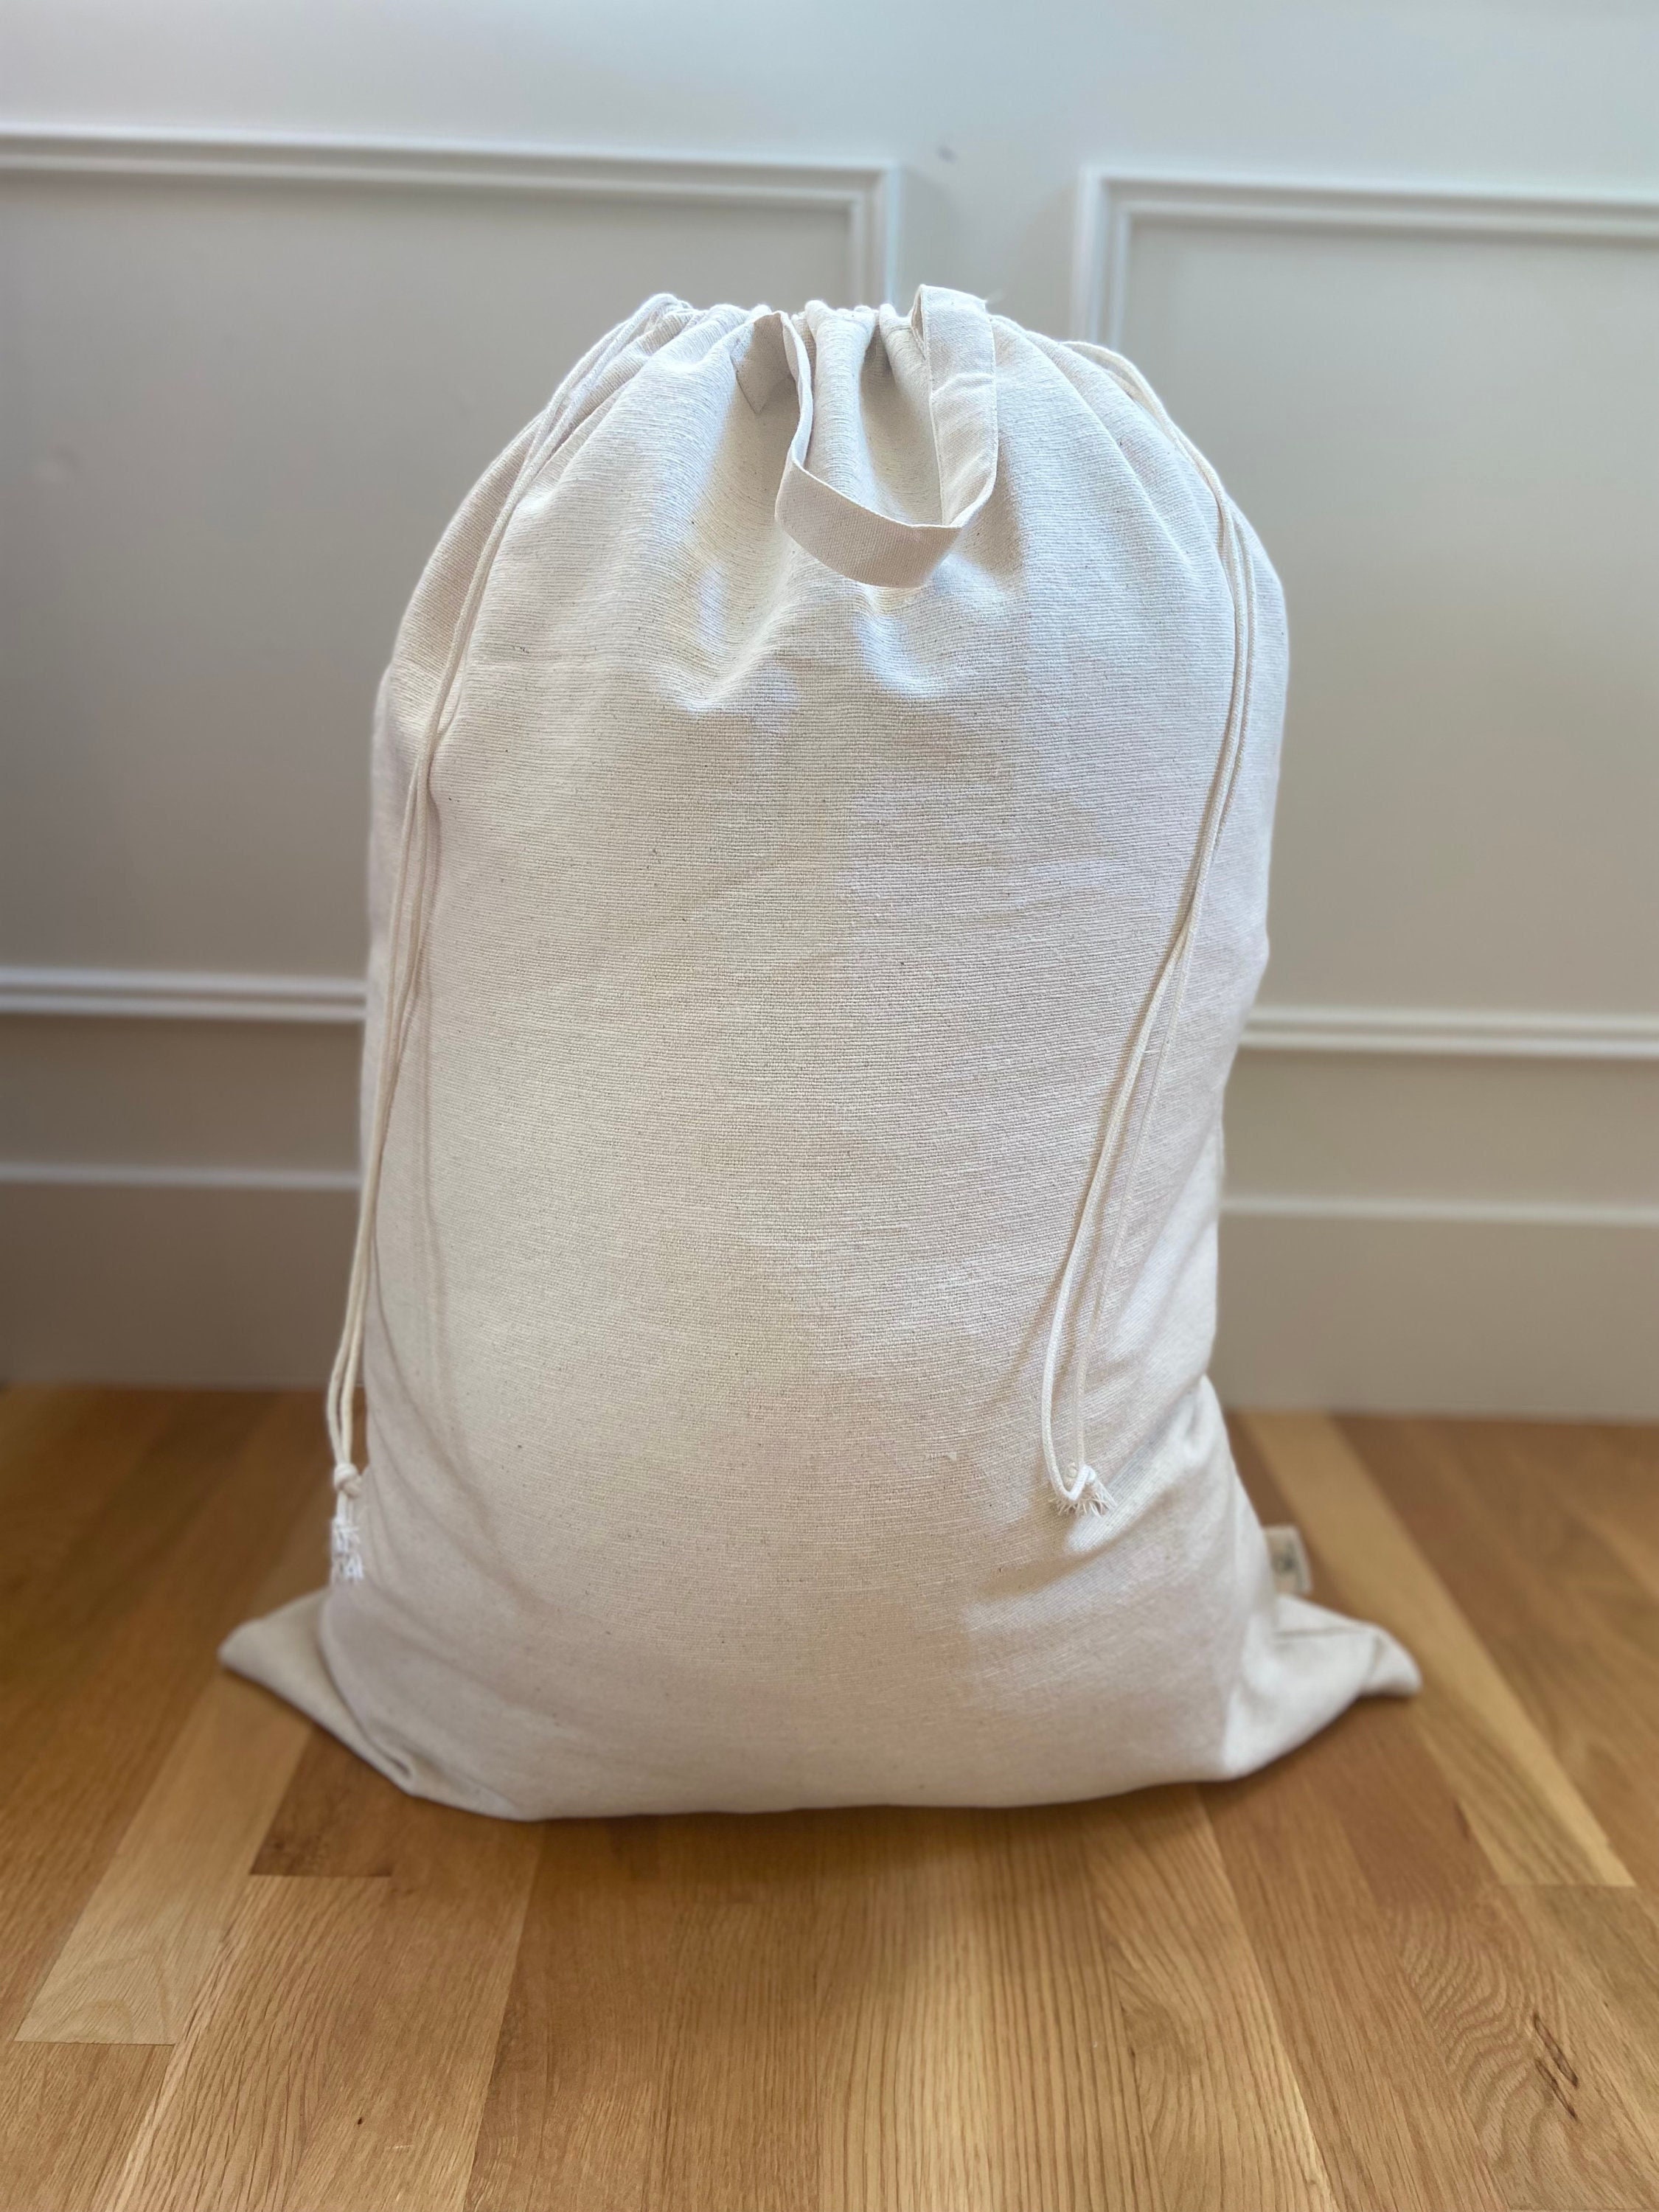 Cotton Laundry Bag Drawstring - 2 Pack, Extra Large Canvas Bags 24'' X 36''  inch - Machine Washable …See more Cotton Laundry Bag Drawstring - 2 Pack